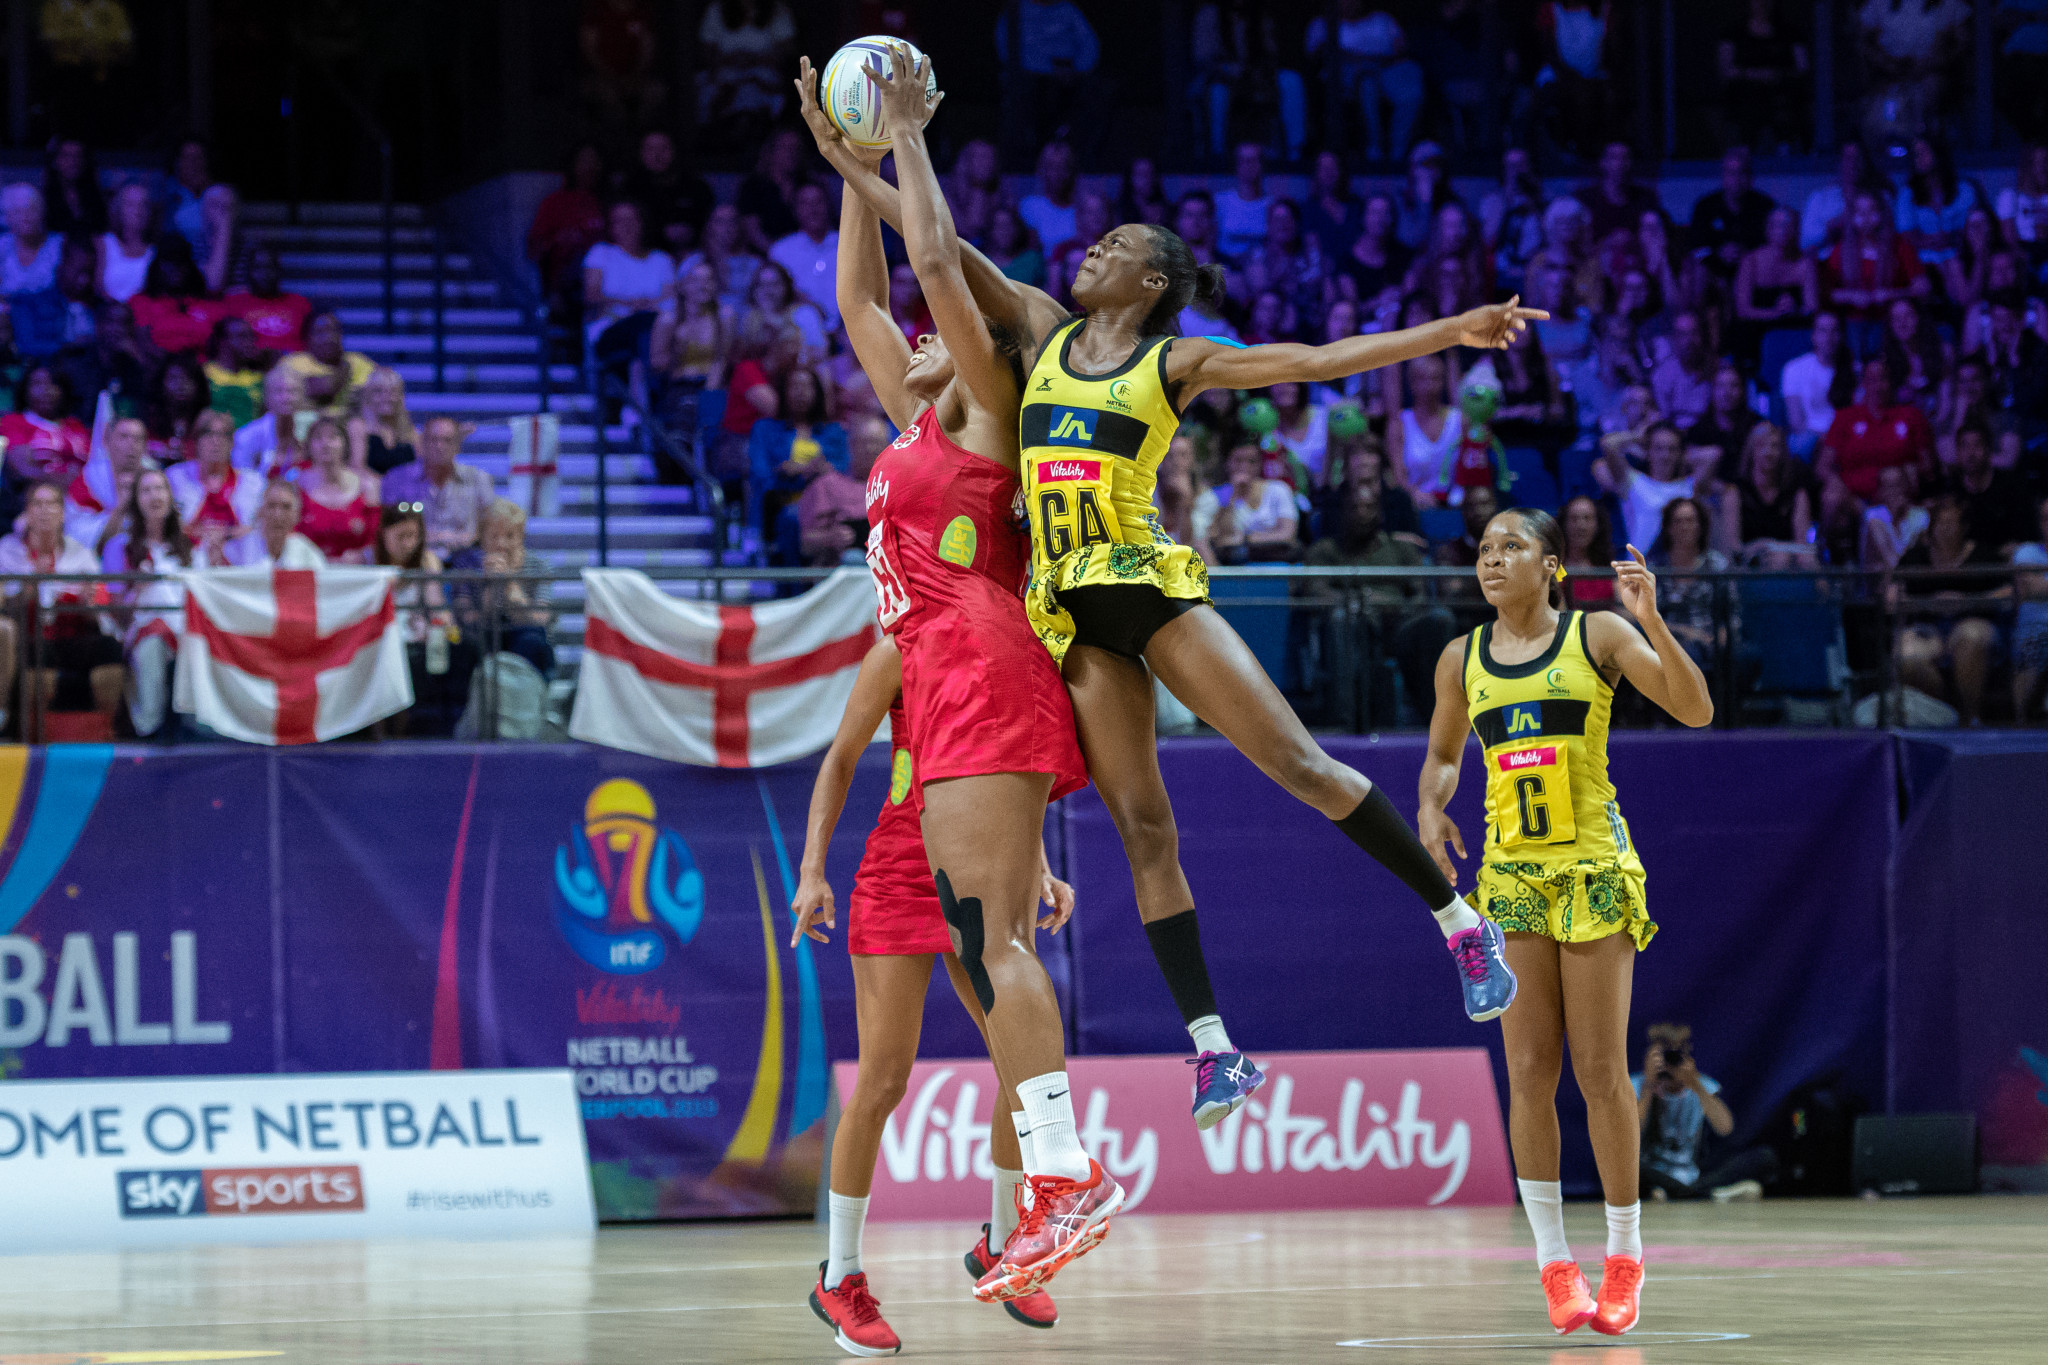 The Netball World Cup began in Liverpool last week ©Getty Images